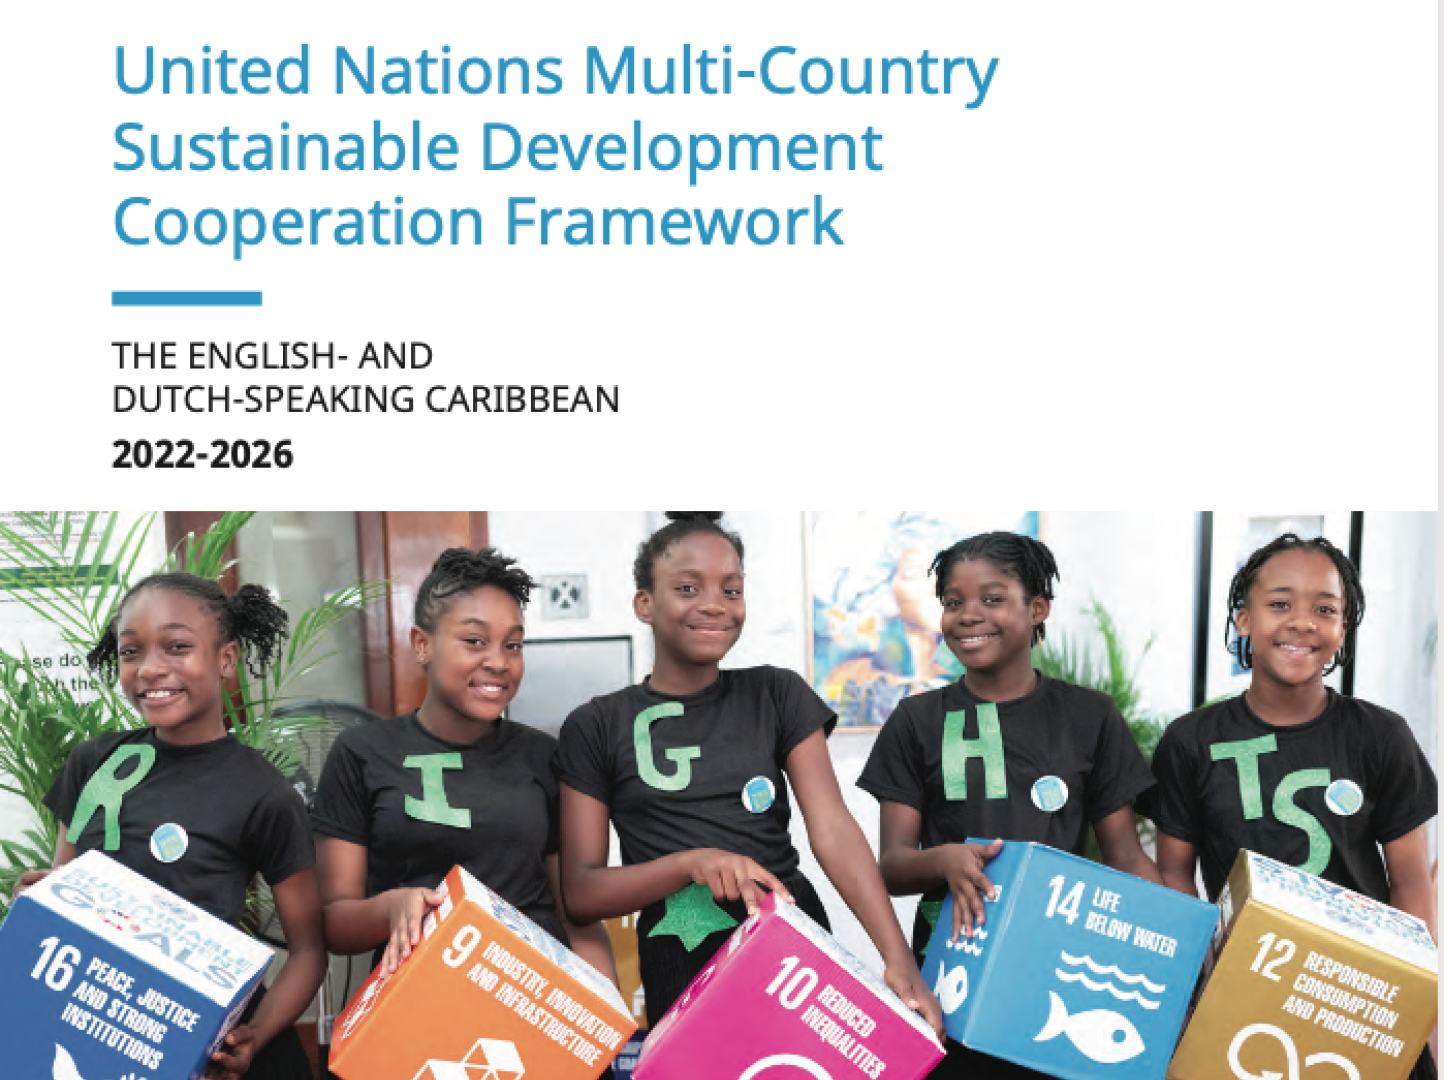 The Multi-Country Sustainable Development Cooperation Framework (MSDCF) 